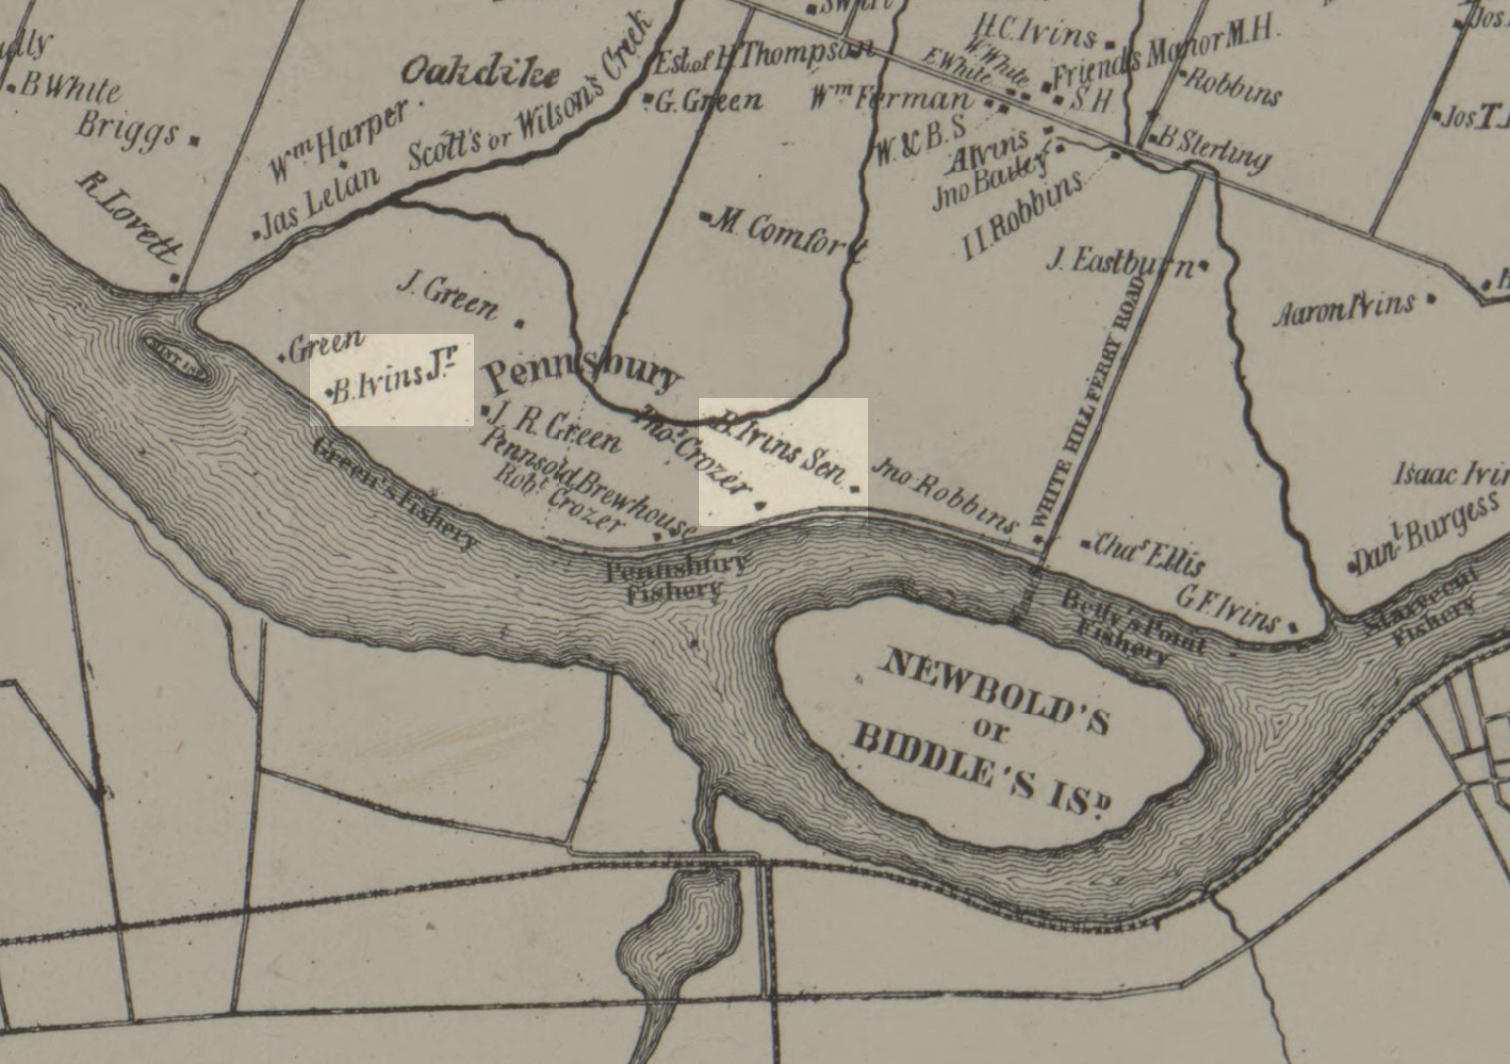 Map of Falls township, with B. Ivins Jr. and B. Ivins Sen. highlighted.